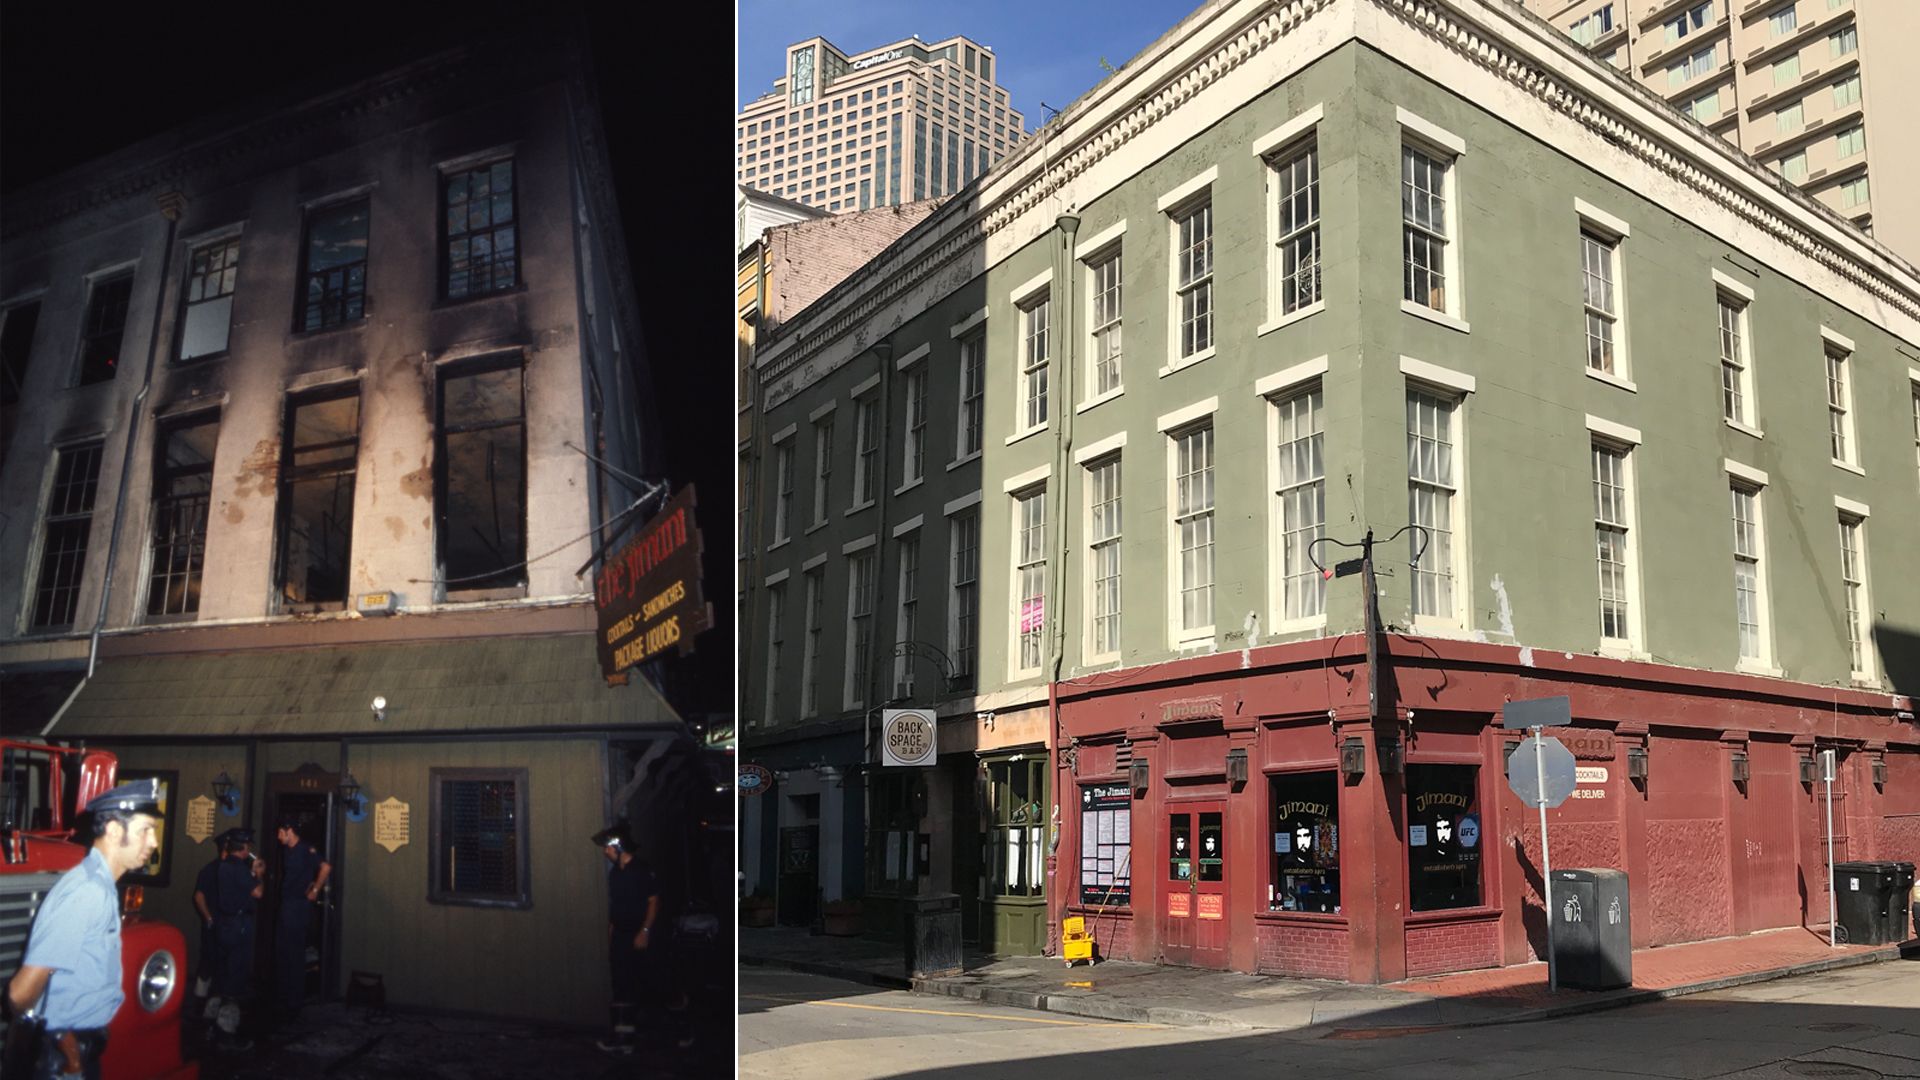 Photos show two photos of the building that housed the Up Stair Lounge. One is from 1973 on the night of the deadly fire and the other is a recent photo of the French Quarter building.